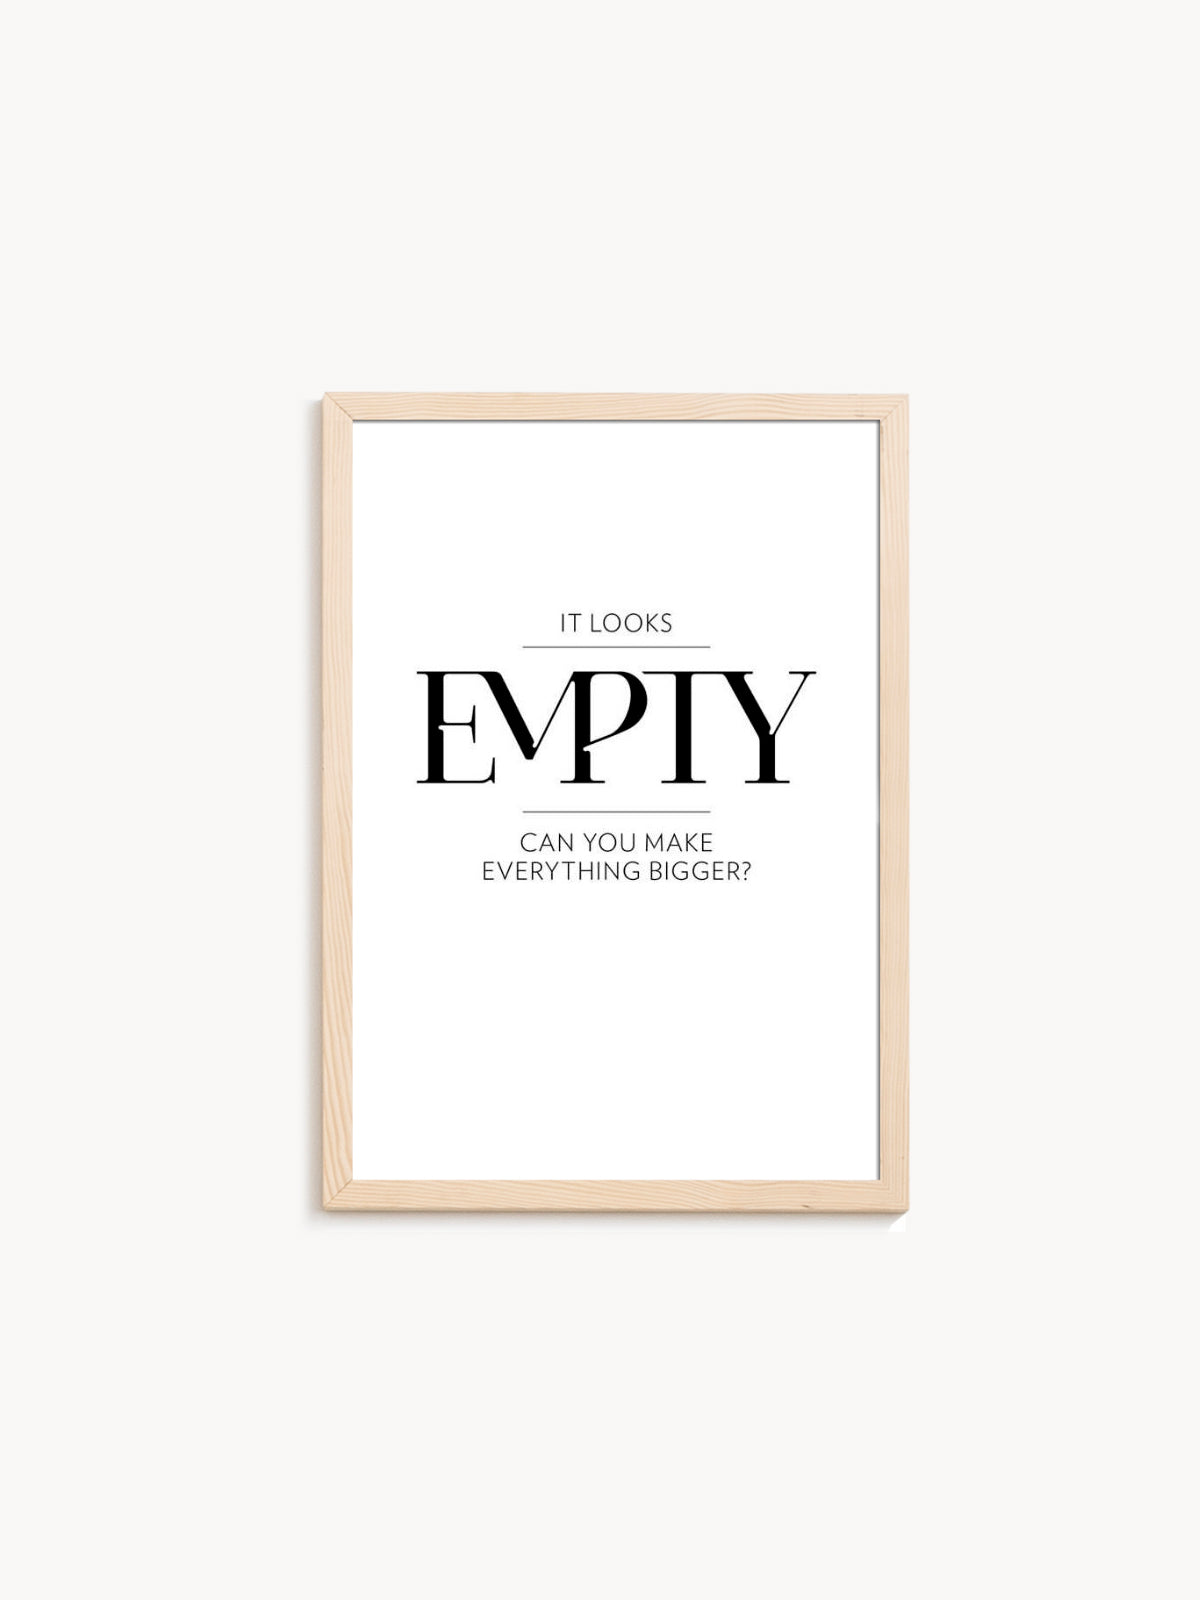 IT LOOKS EMPTY graphic - Marcell Puskás